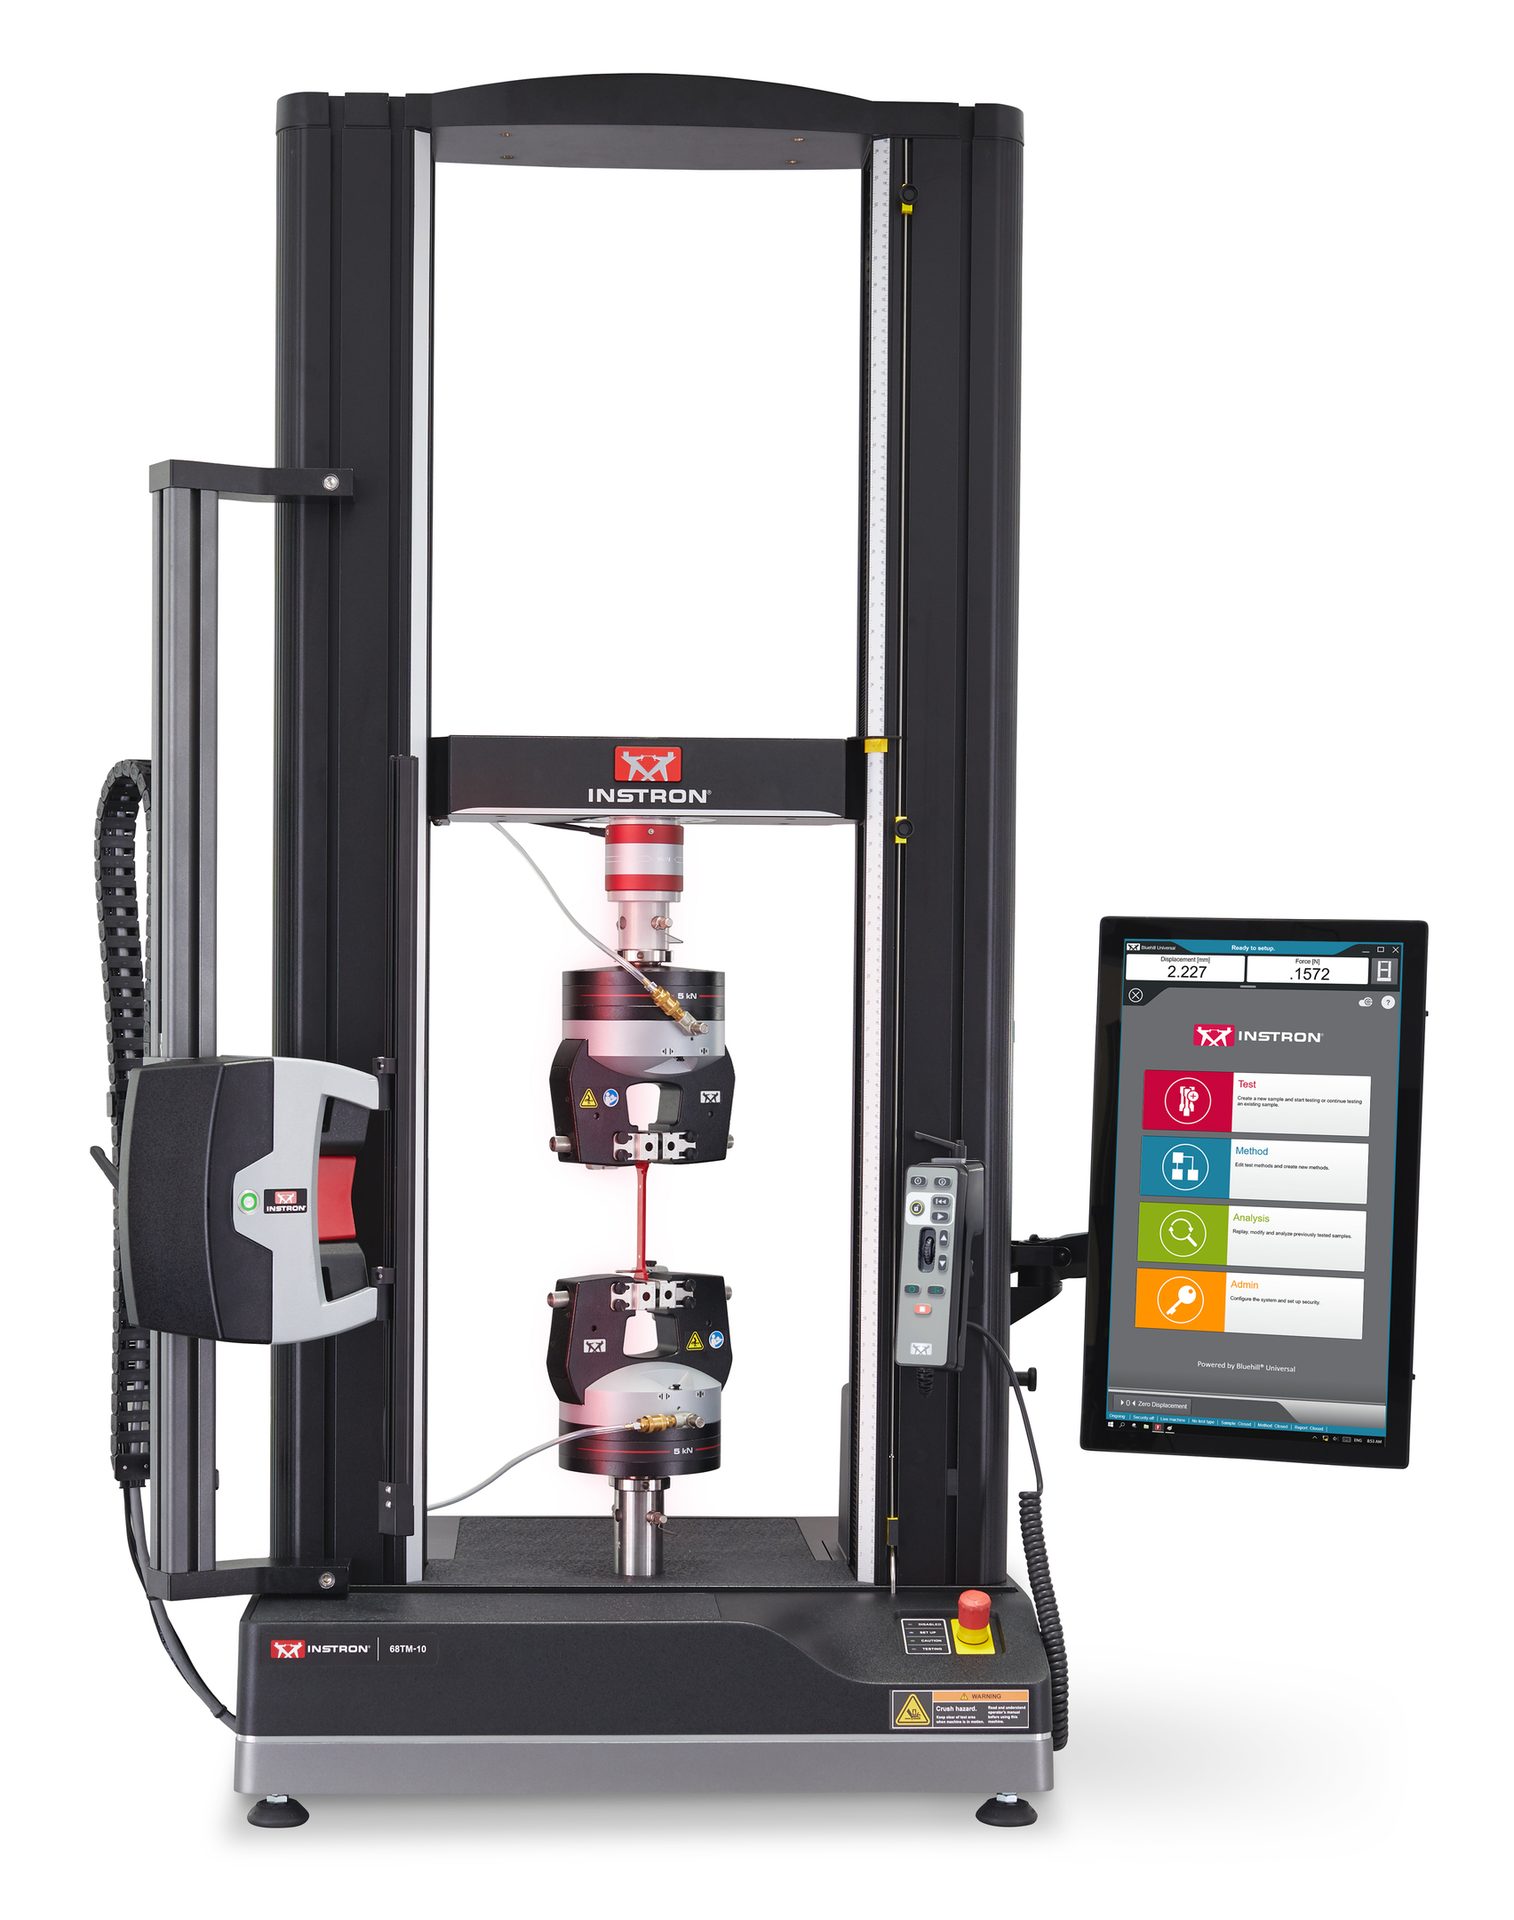 Instron 6800 Series Universal Testing System